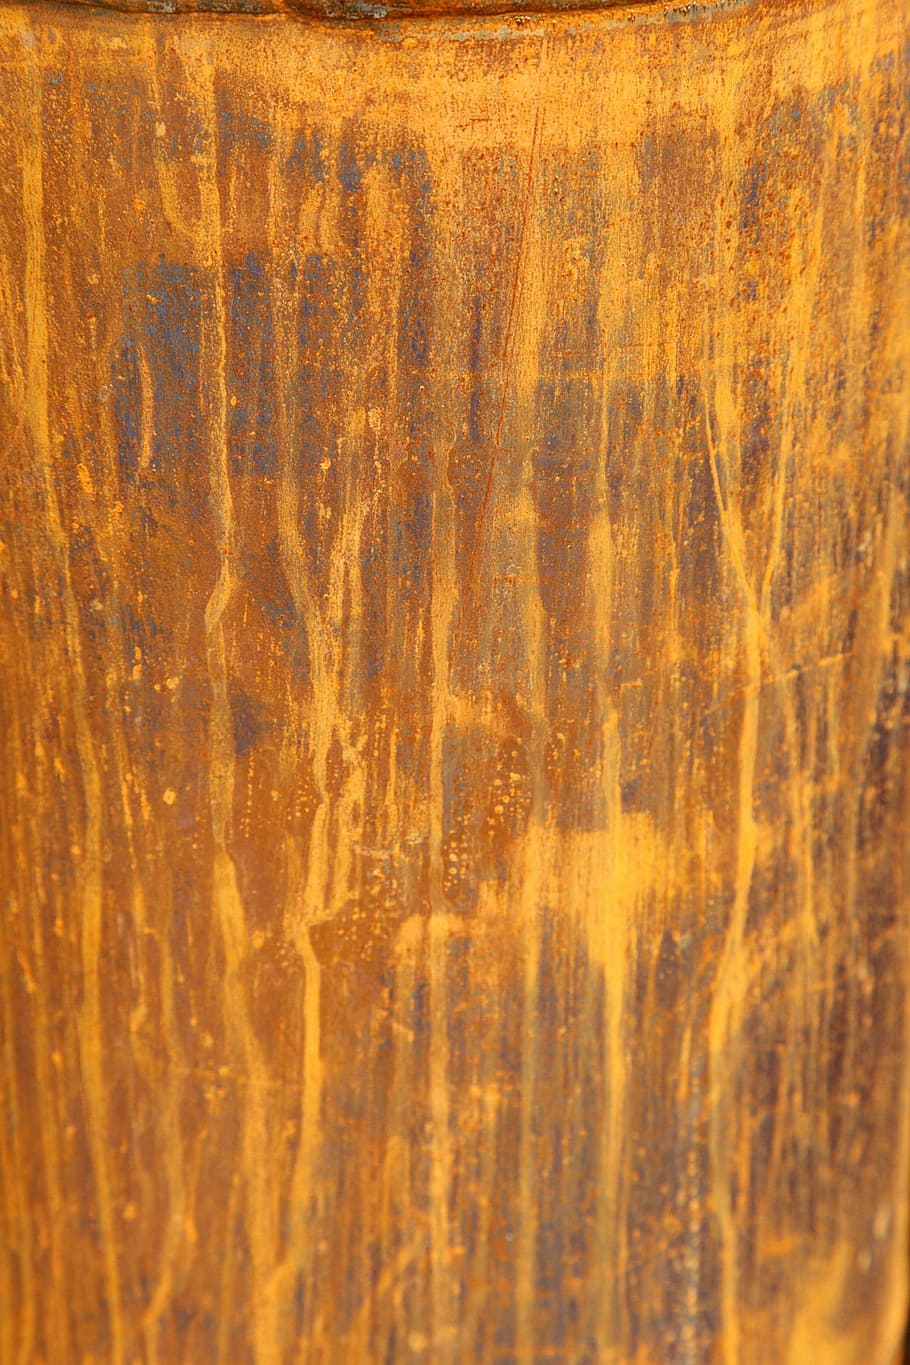 Rust, Texture, Oxide, Tank, Metal, abstract, backgrounds, textured, gold colored, paint